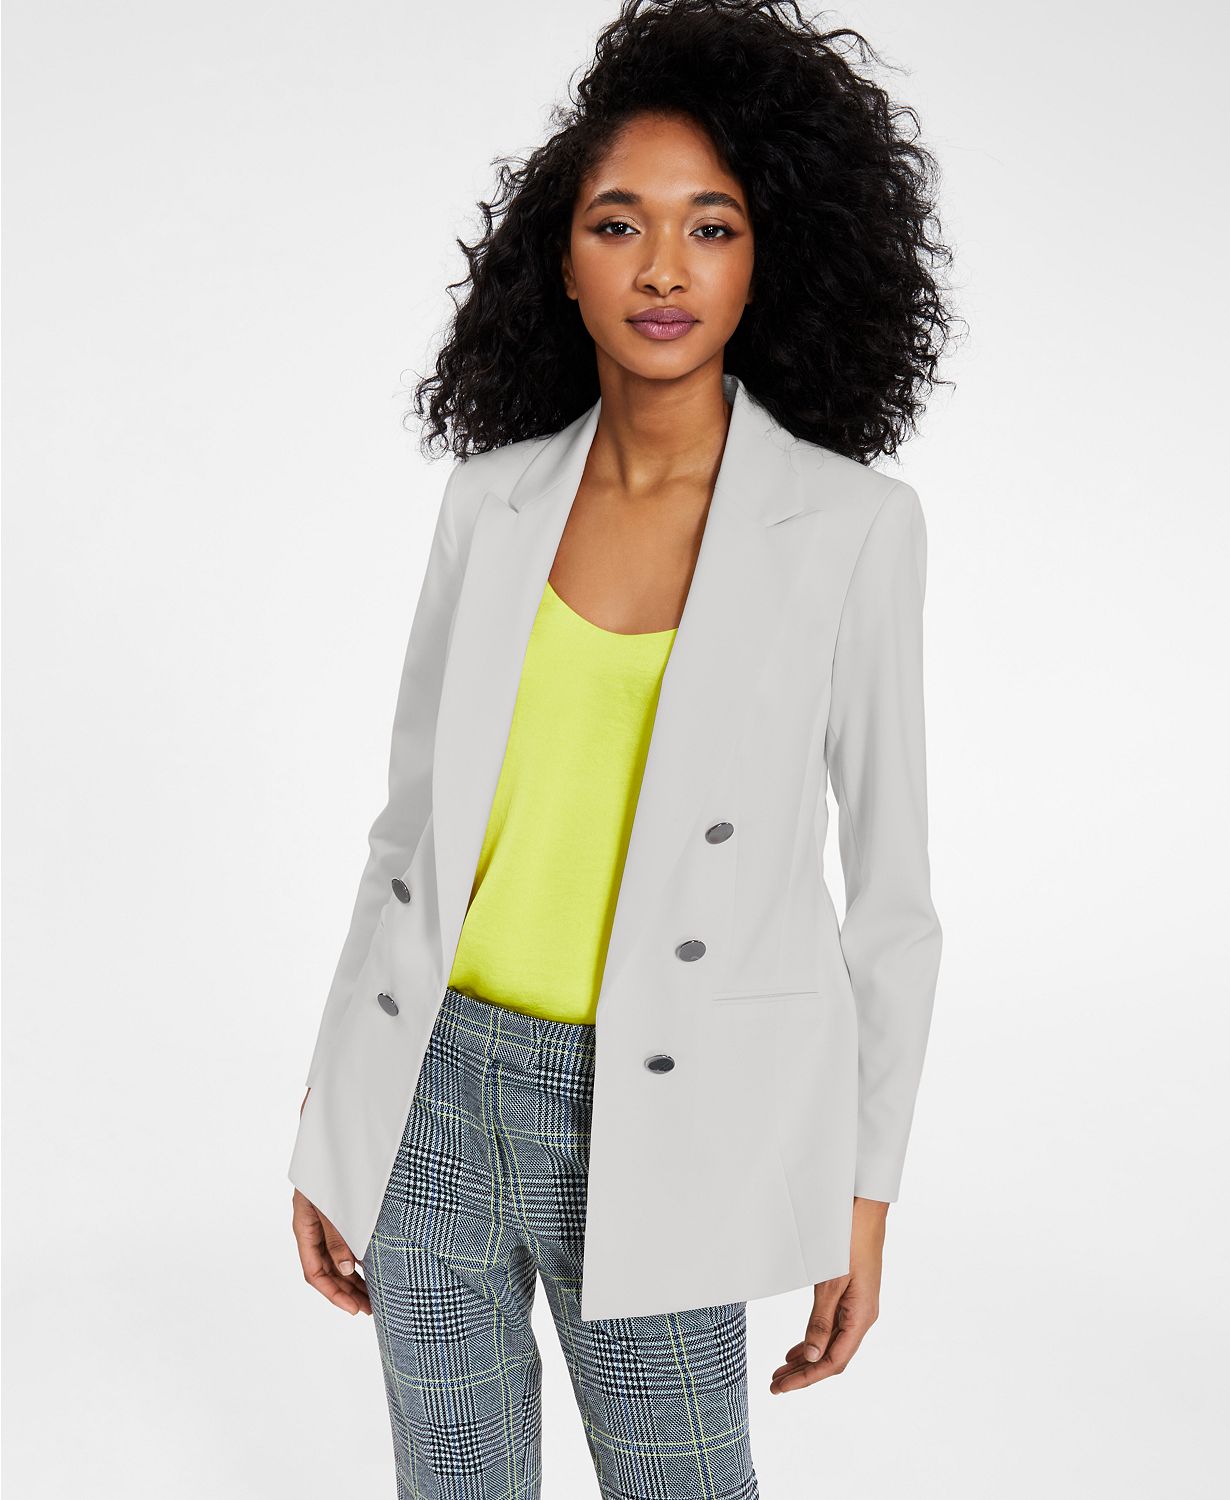 How to Wear a White Blazer With More Things to More Places - YOUR TRUE ...